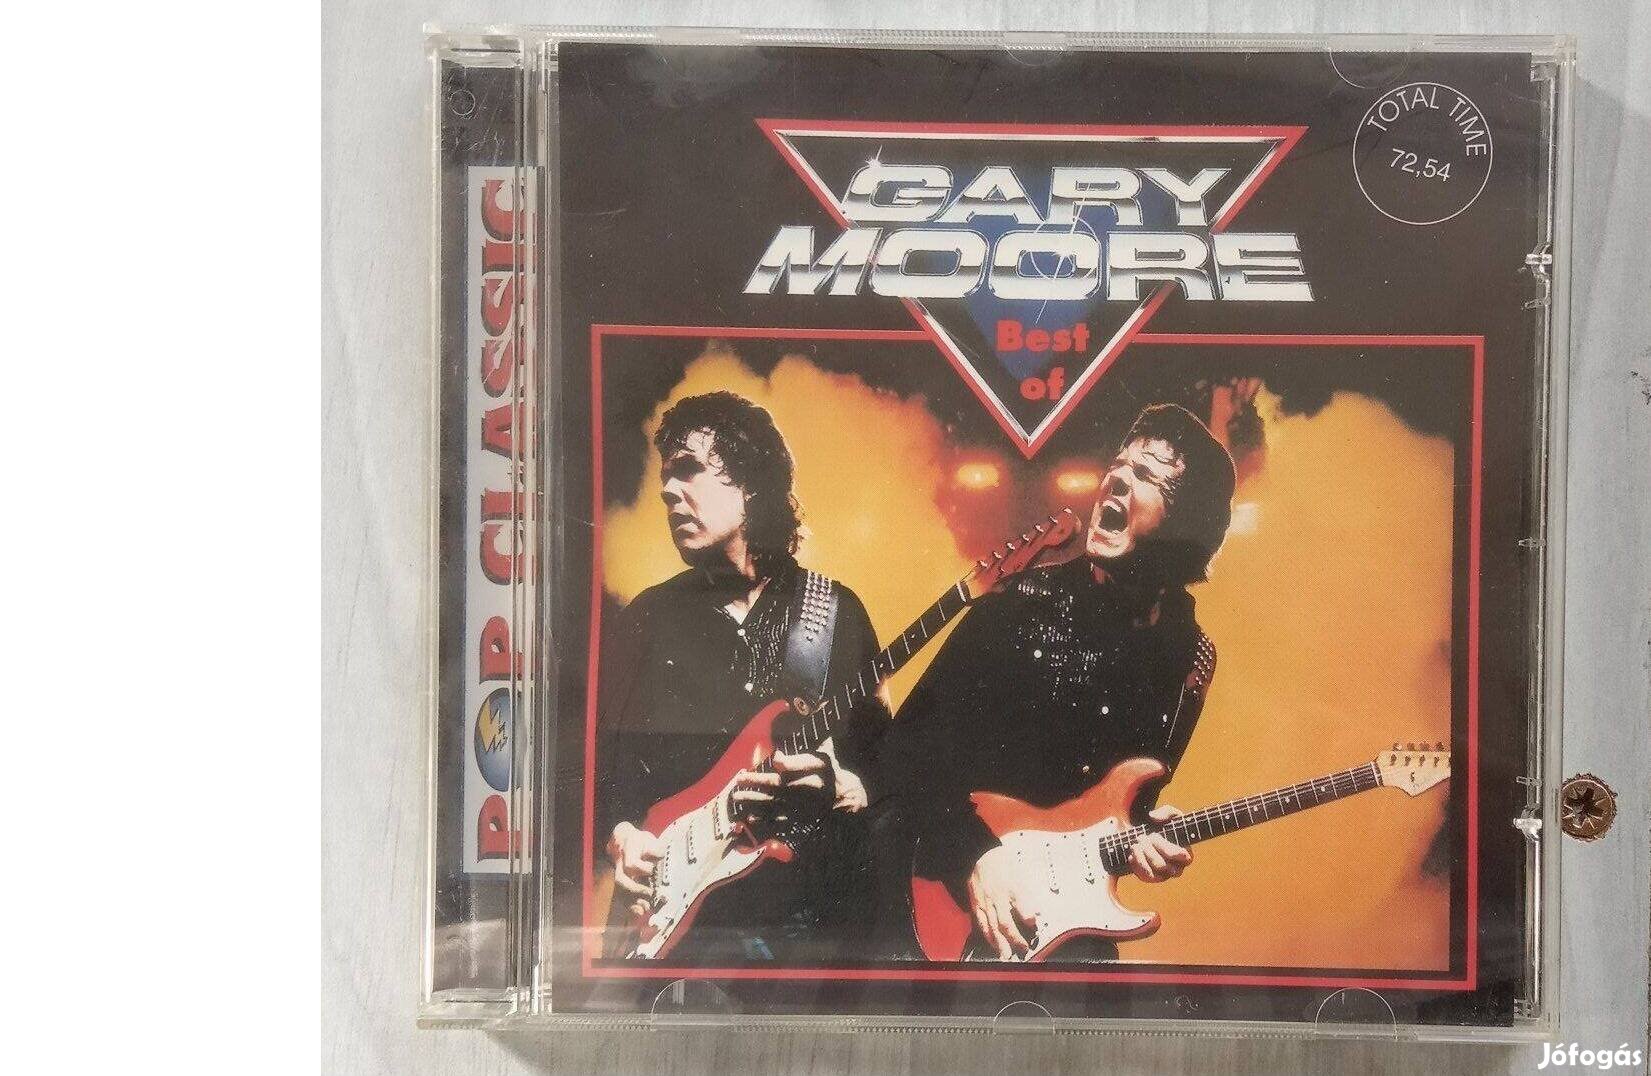 The Best of Gary Moore karcmentes cd